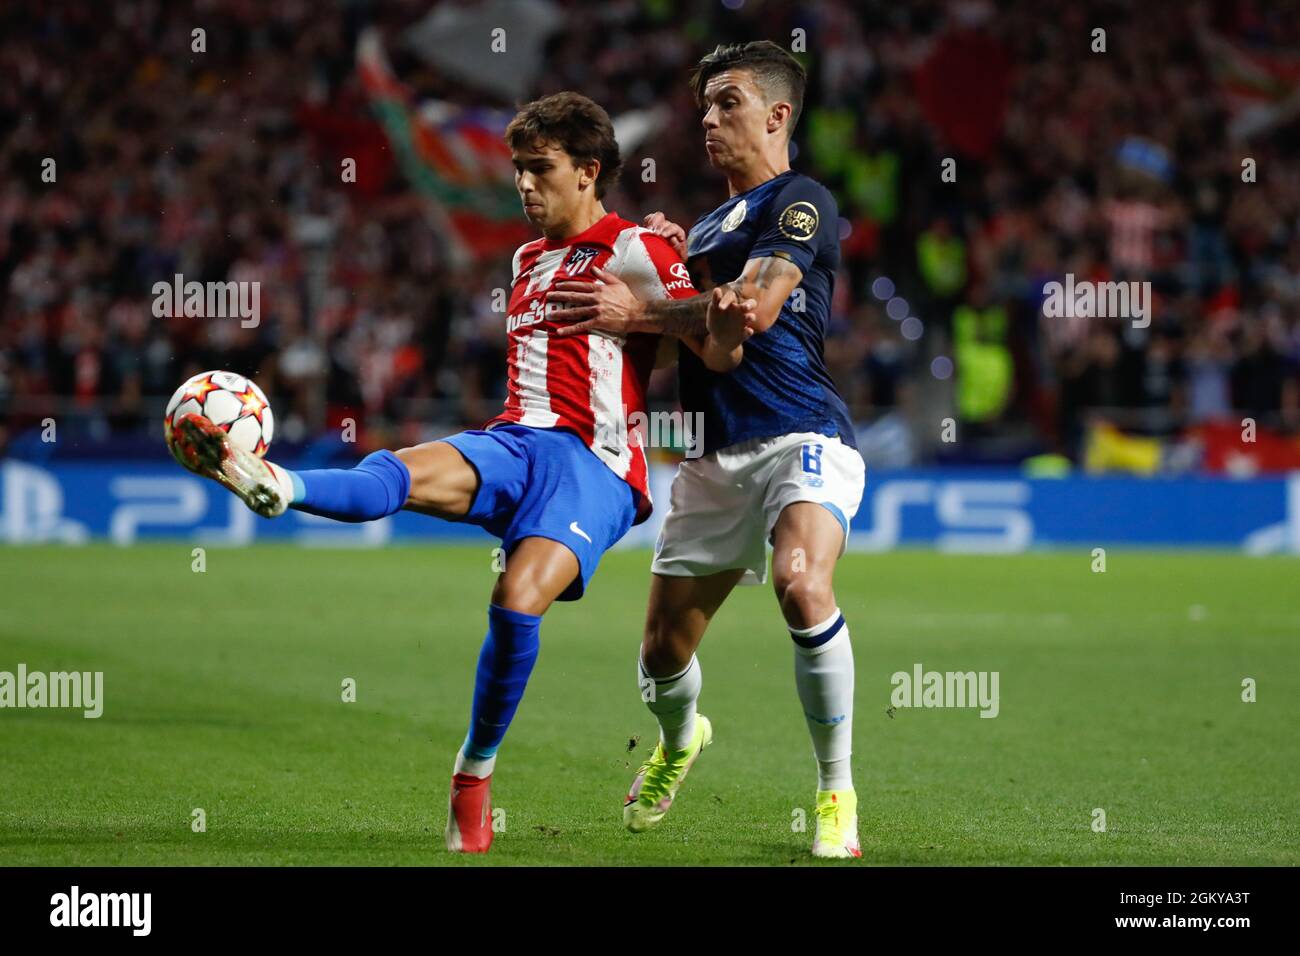 Madrid, Spain. 15th Sep 2021. Joao Felix of Atletico de Madrid in action with Mateus Uribe of FC Porto during the UEFA Champions League match between Atletico de Madrid and FC Porto at Wanda Metropolitano in Madrid, Spain. Credit: DAX Images/Alamy Live News Stock Photo